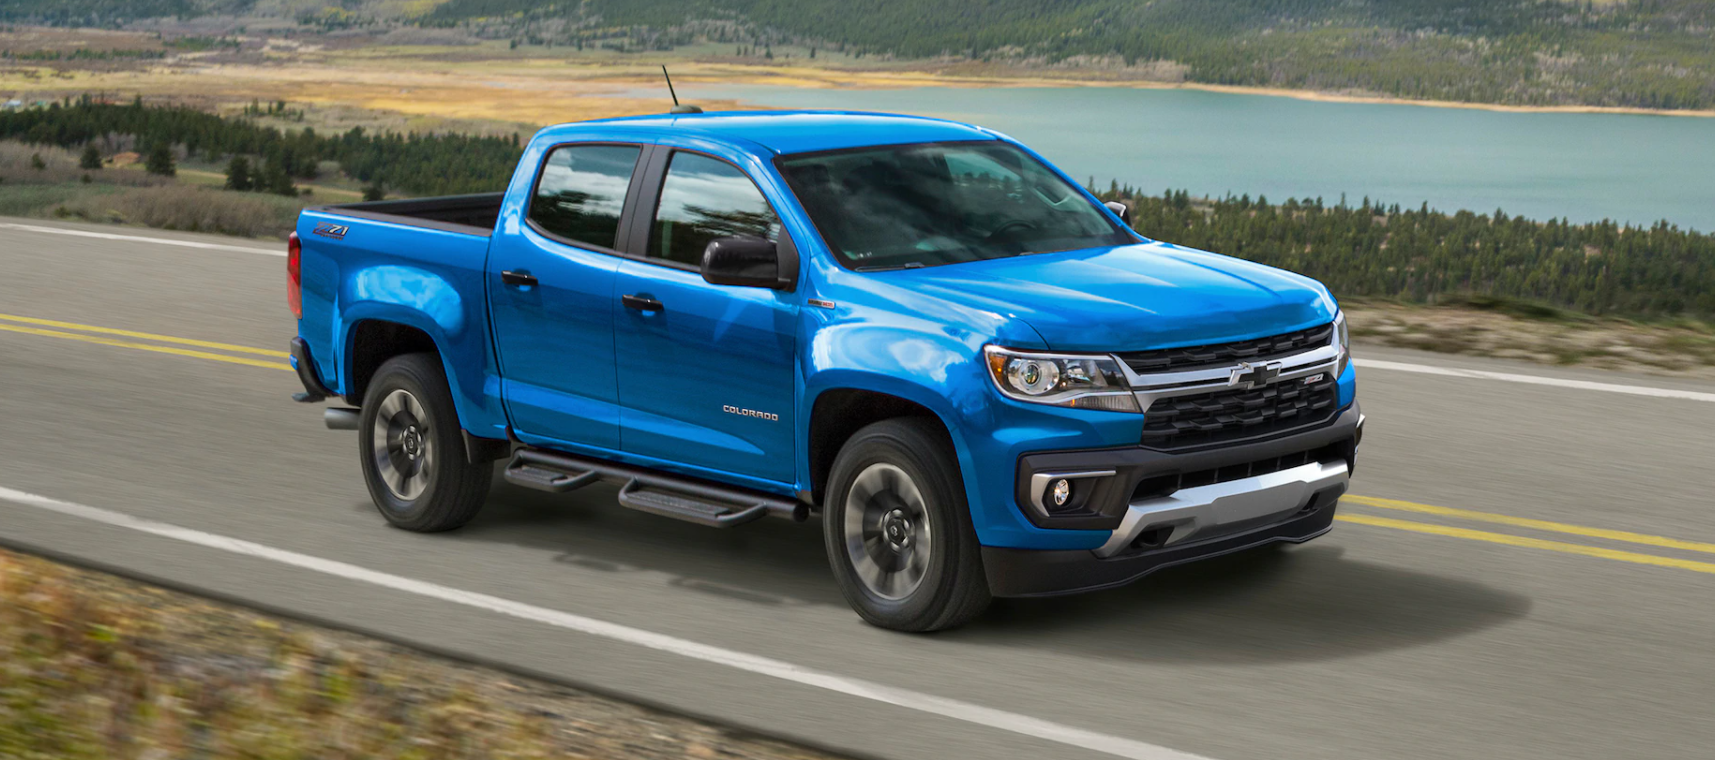 Inside The 2021 Chevrolet Colorado: A Versatile, Capable and Affordable Pickup